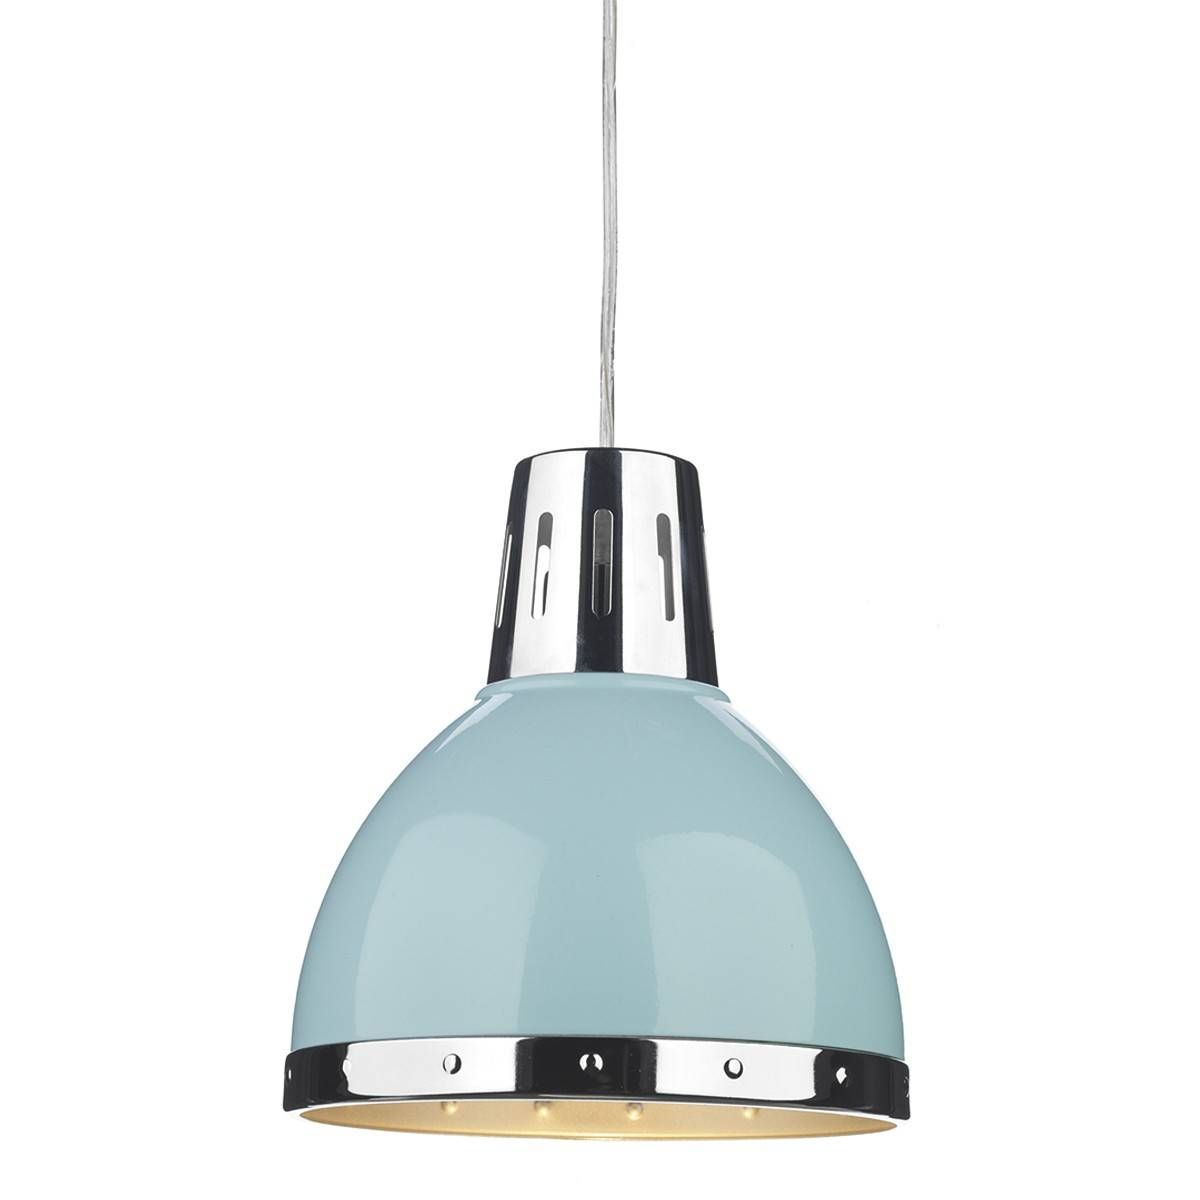 Osaka Non Elec Pendant Pale Blue With Regard To Pale Blue Pendant Lights (View 15 of 15)